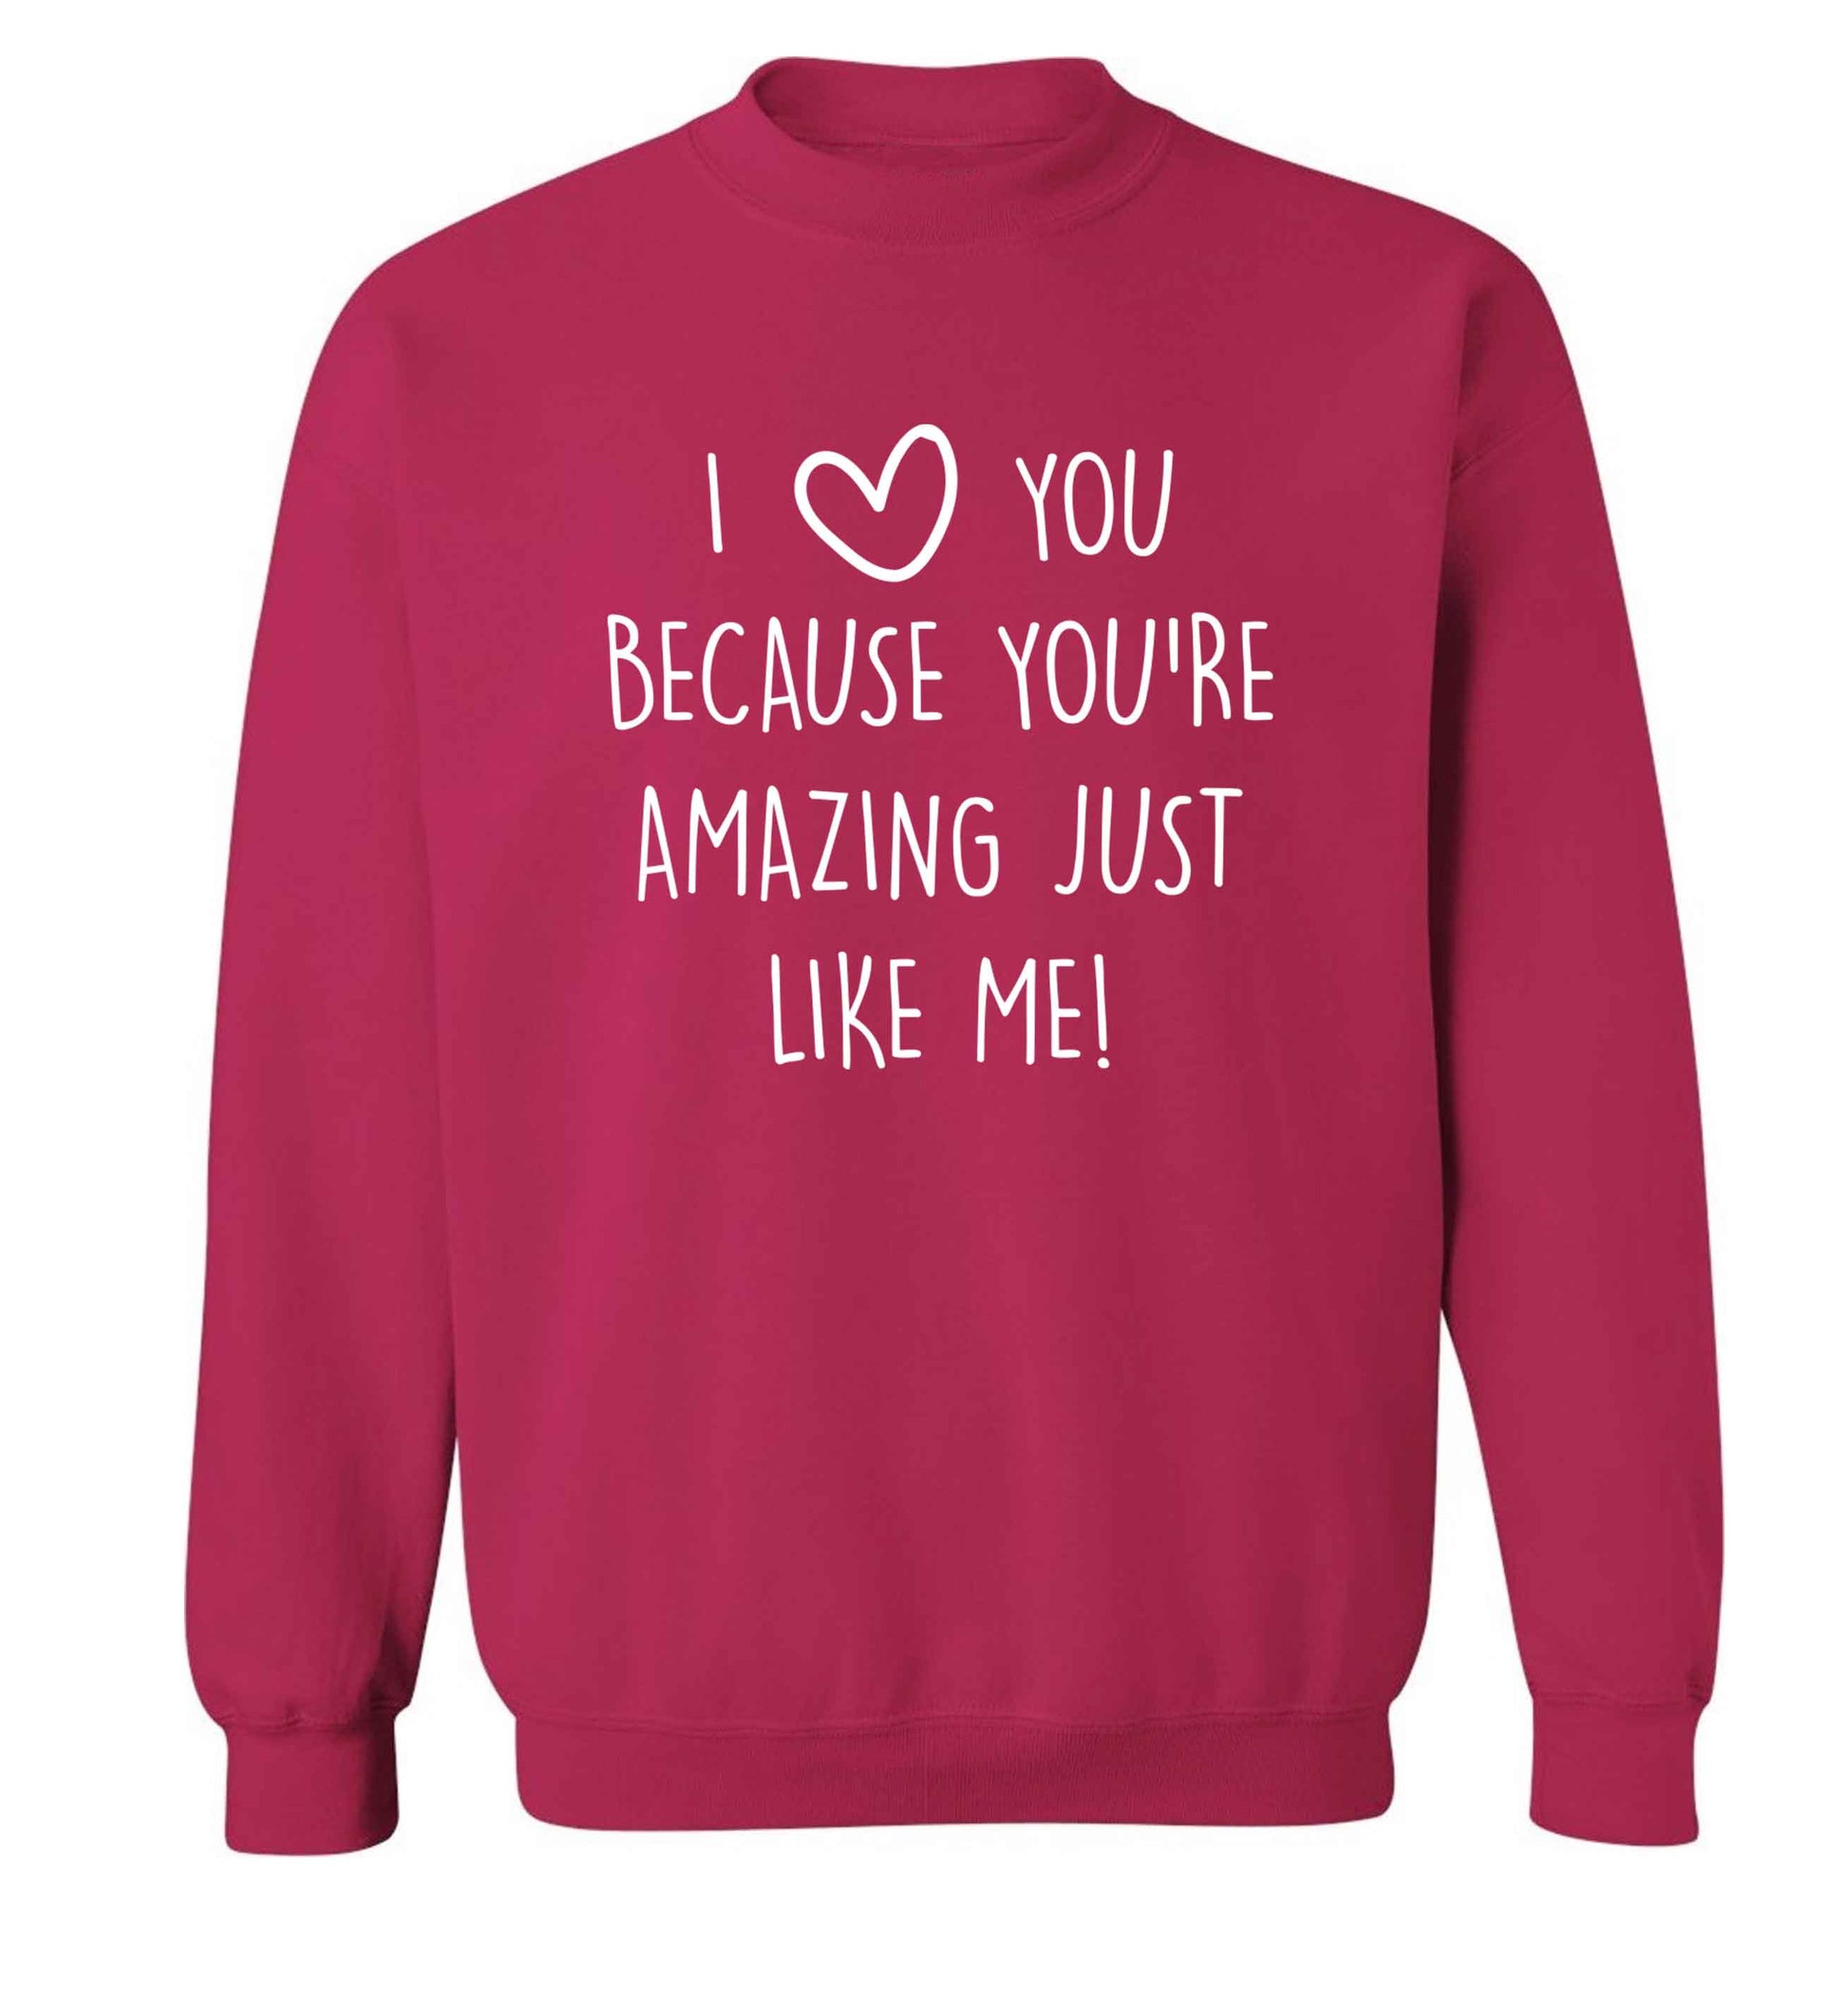 I love you because you're amazing just like me adult's unisex pink sweater 2XL